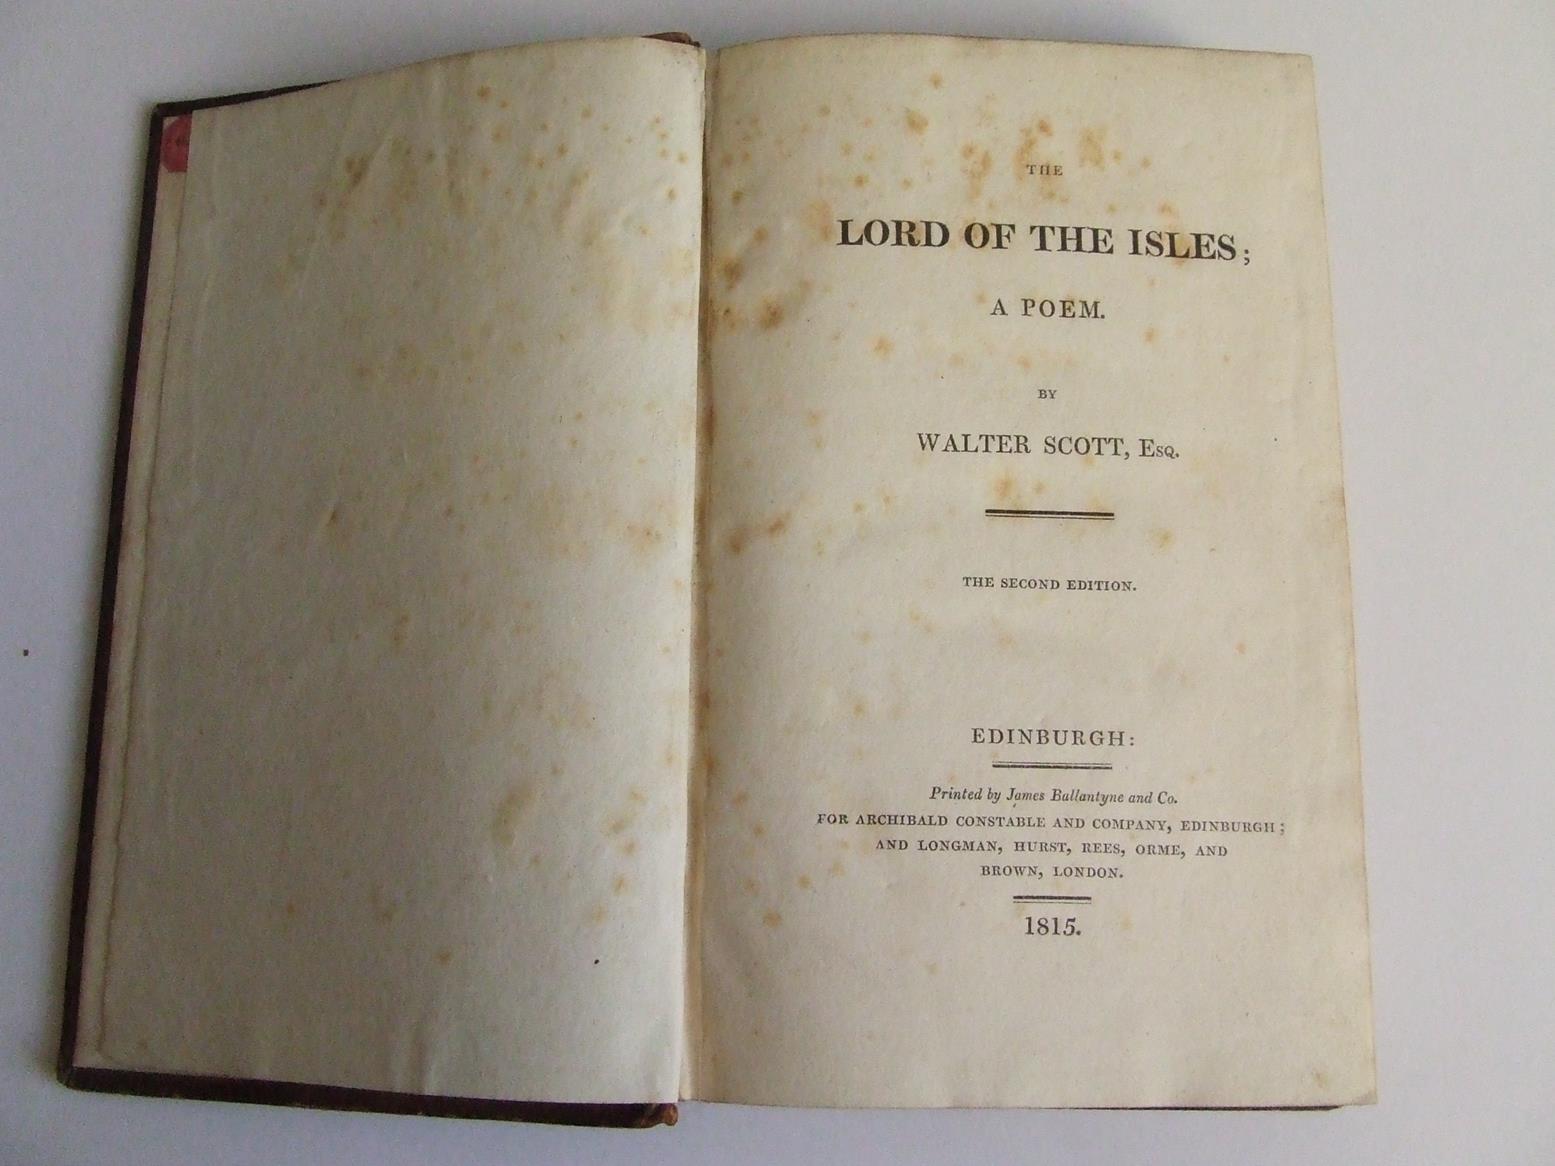 The Lord of the Isles; a poem. the second edition